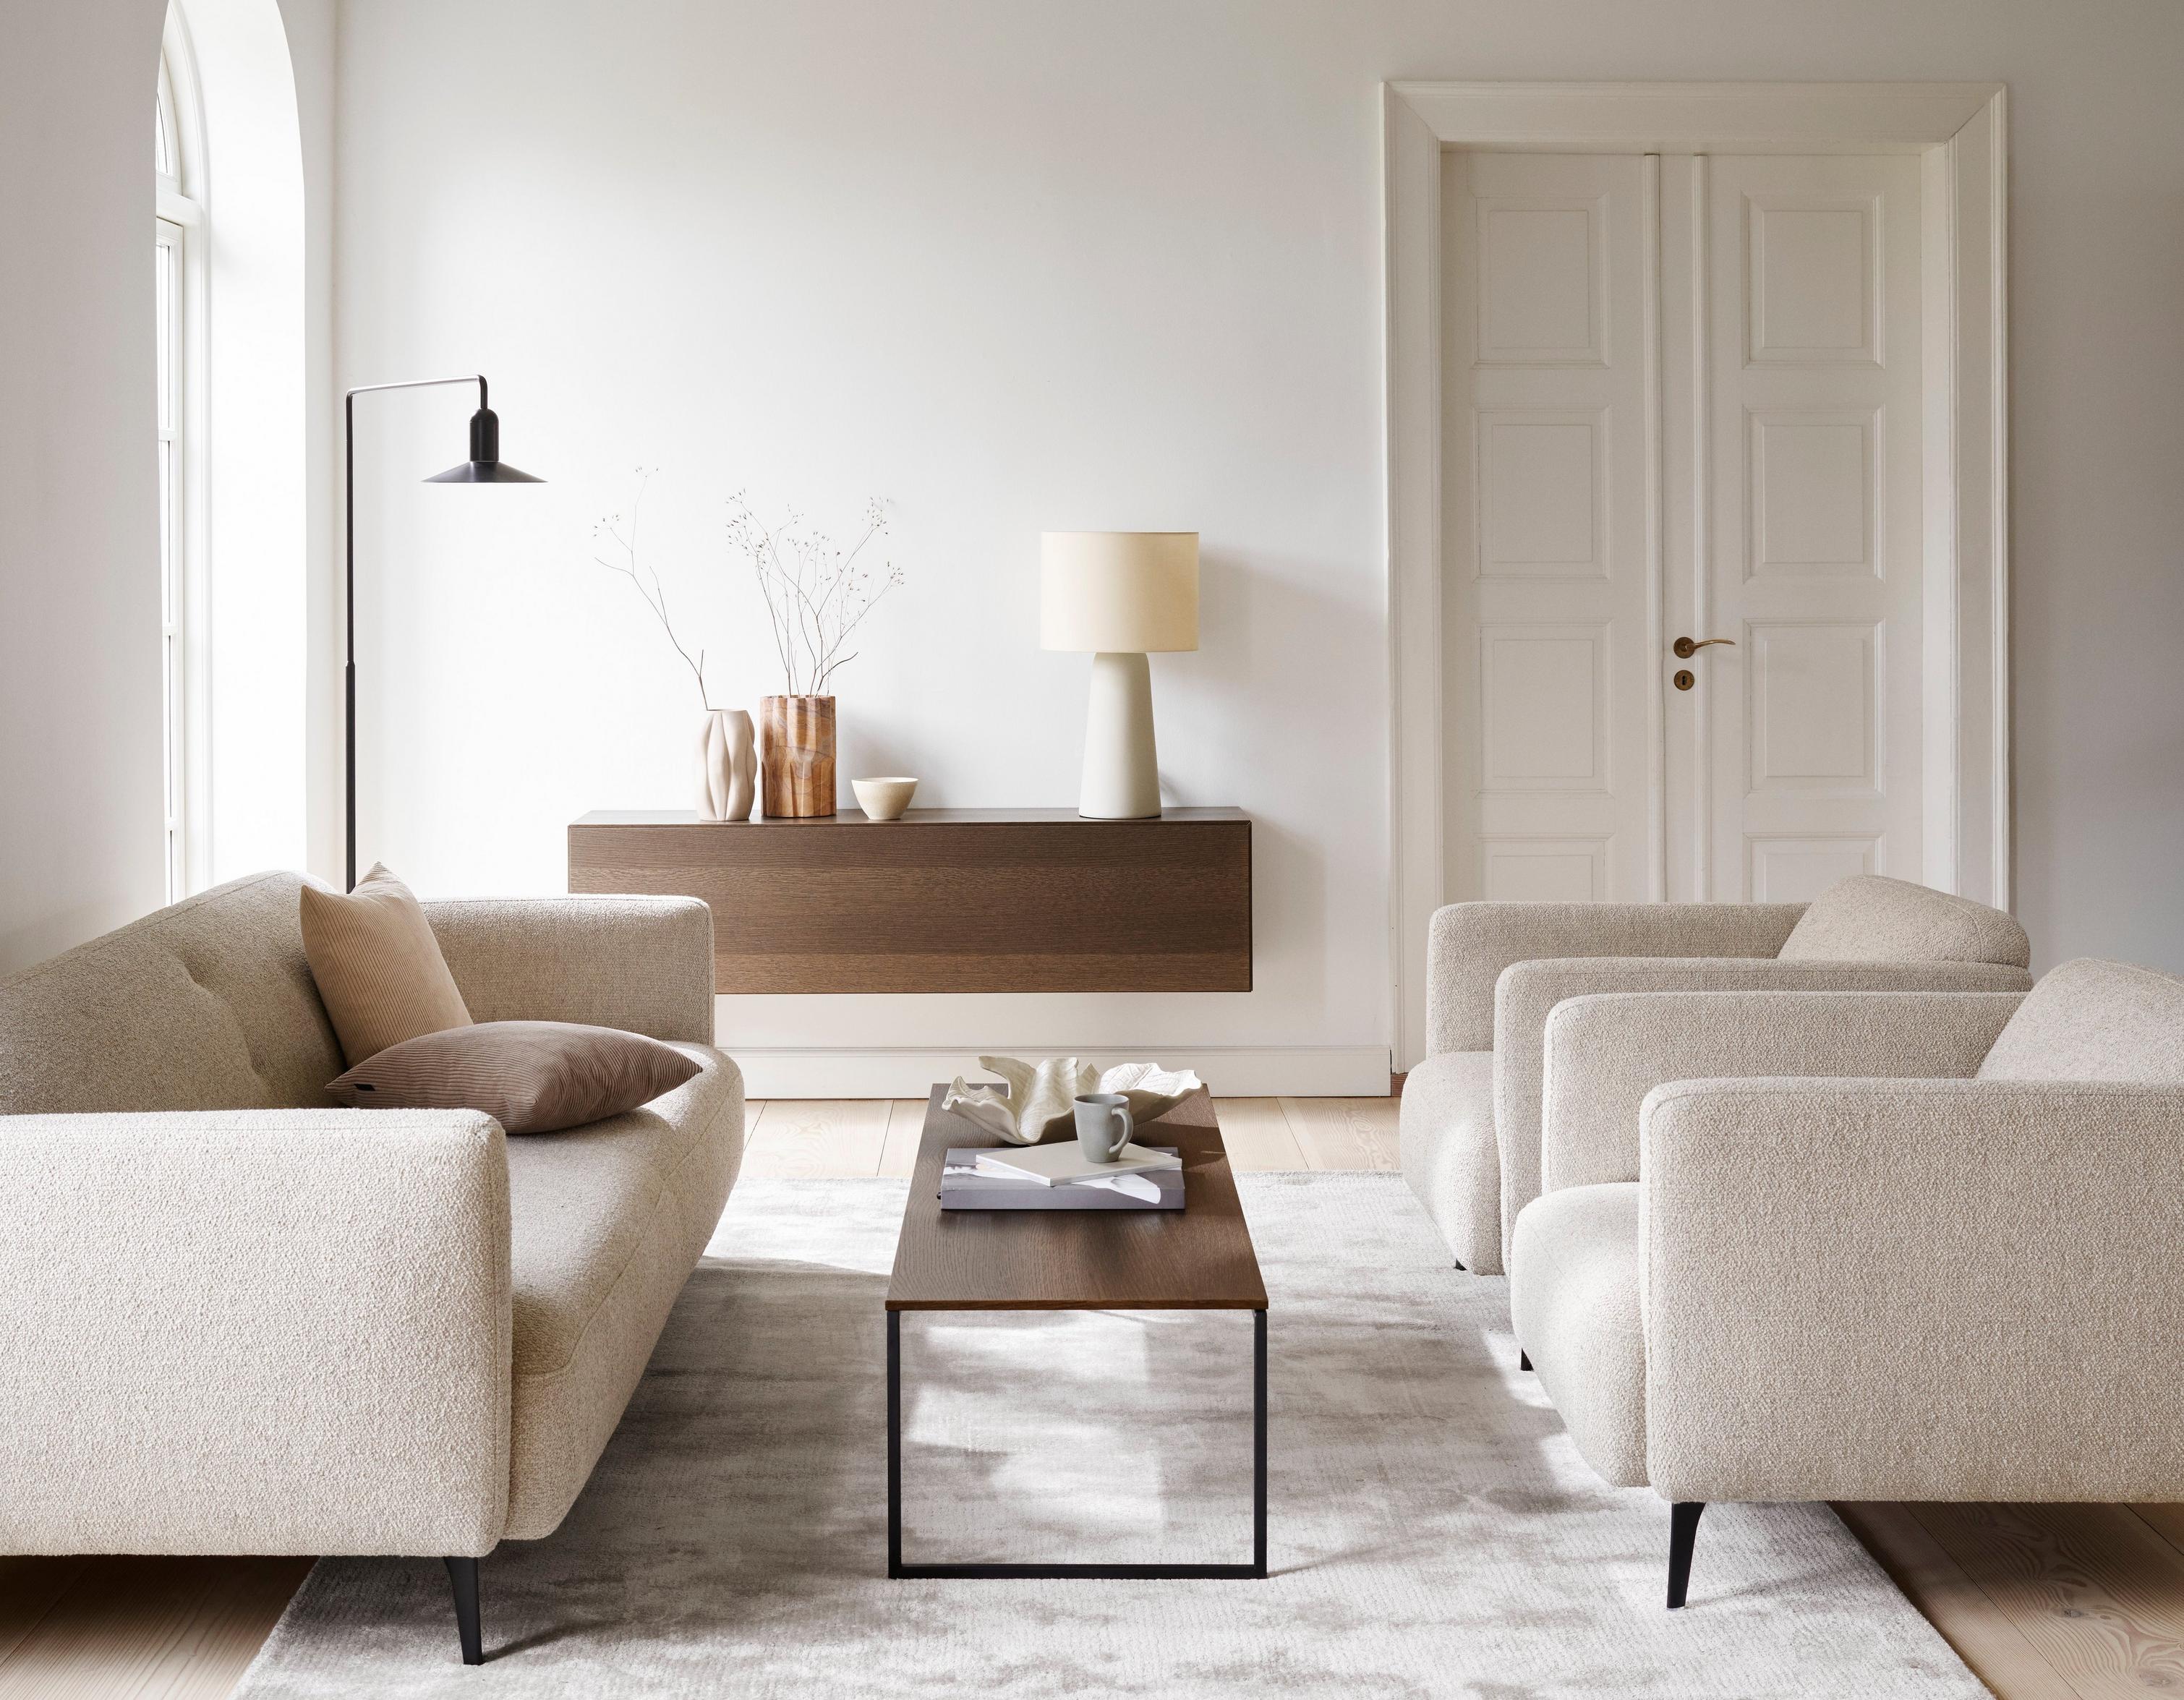 The Modena 3-seater in beige Lazio with the Modena chair and the Lugo coffee table.